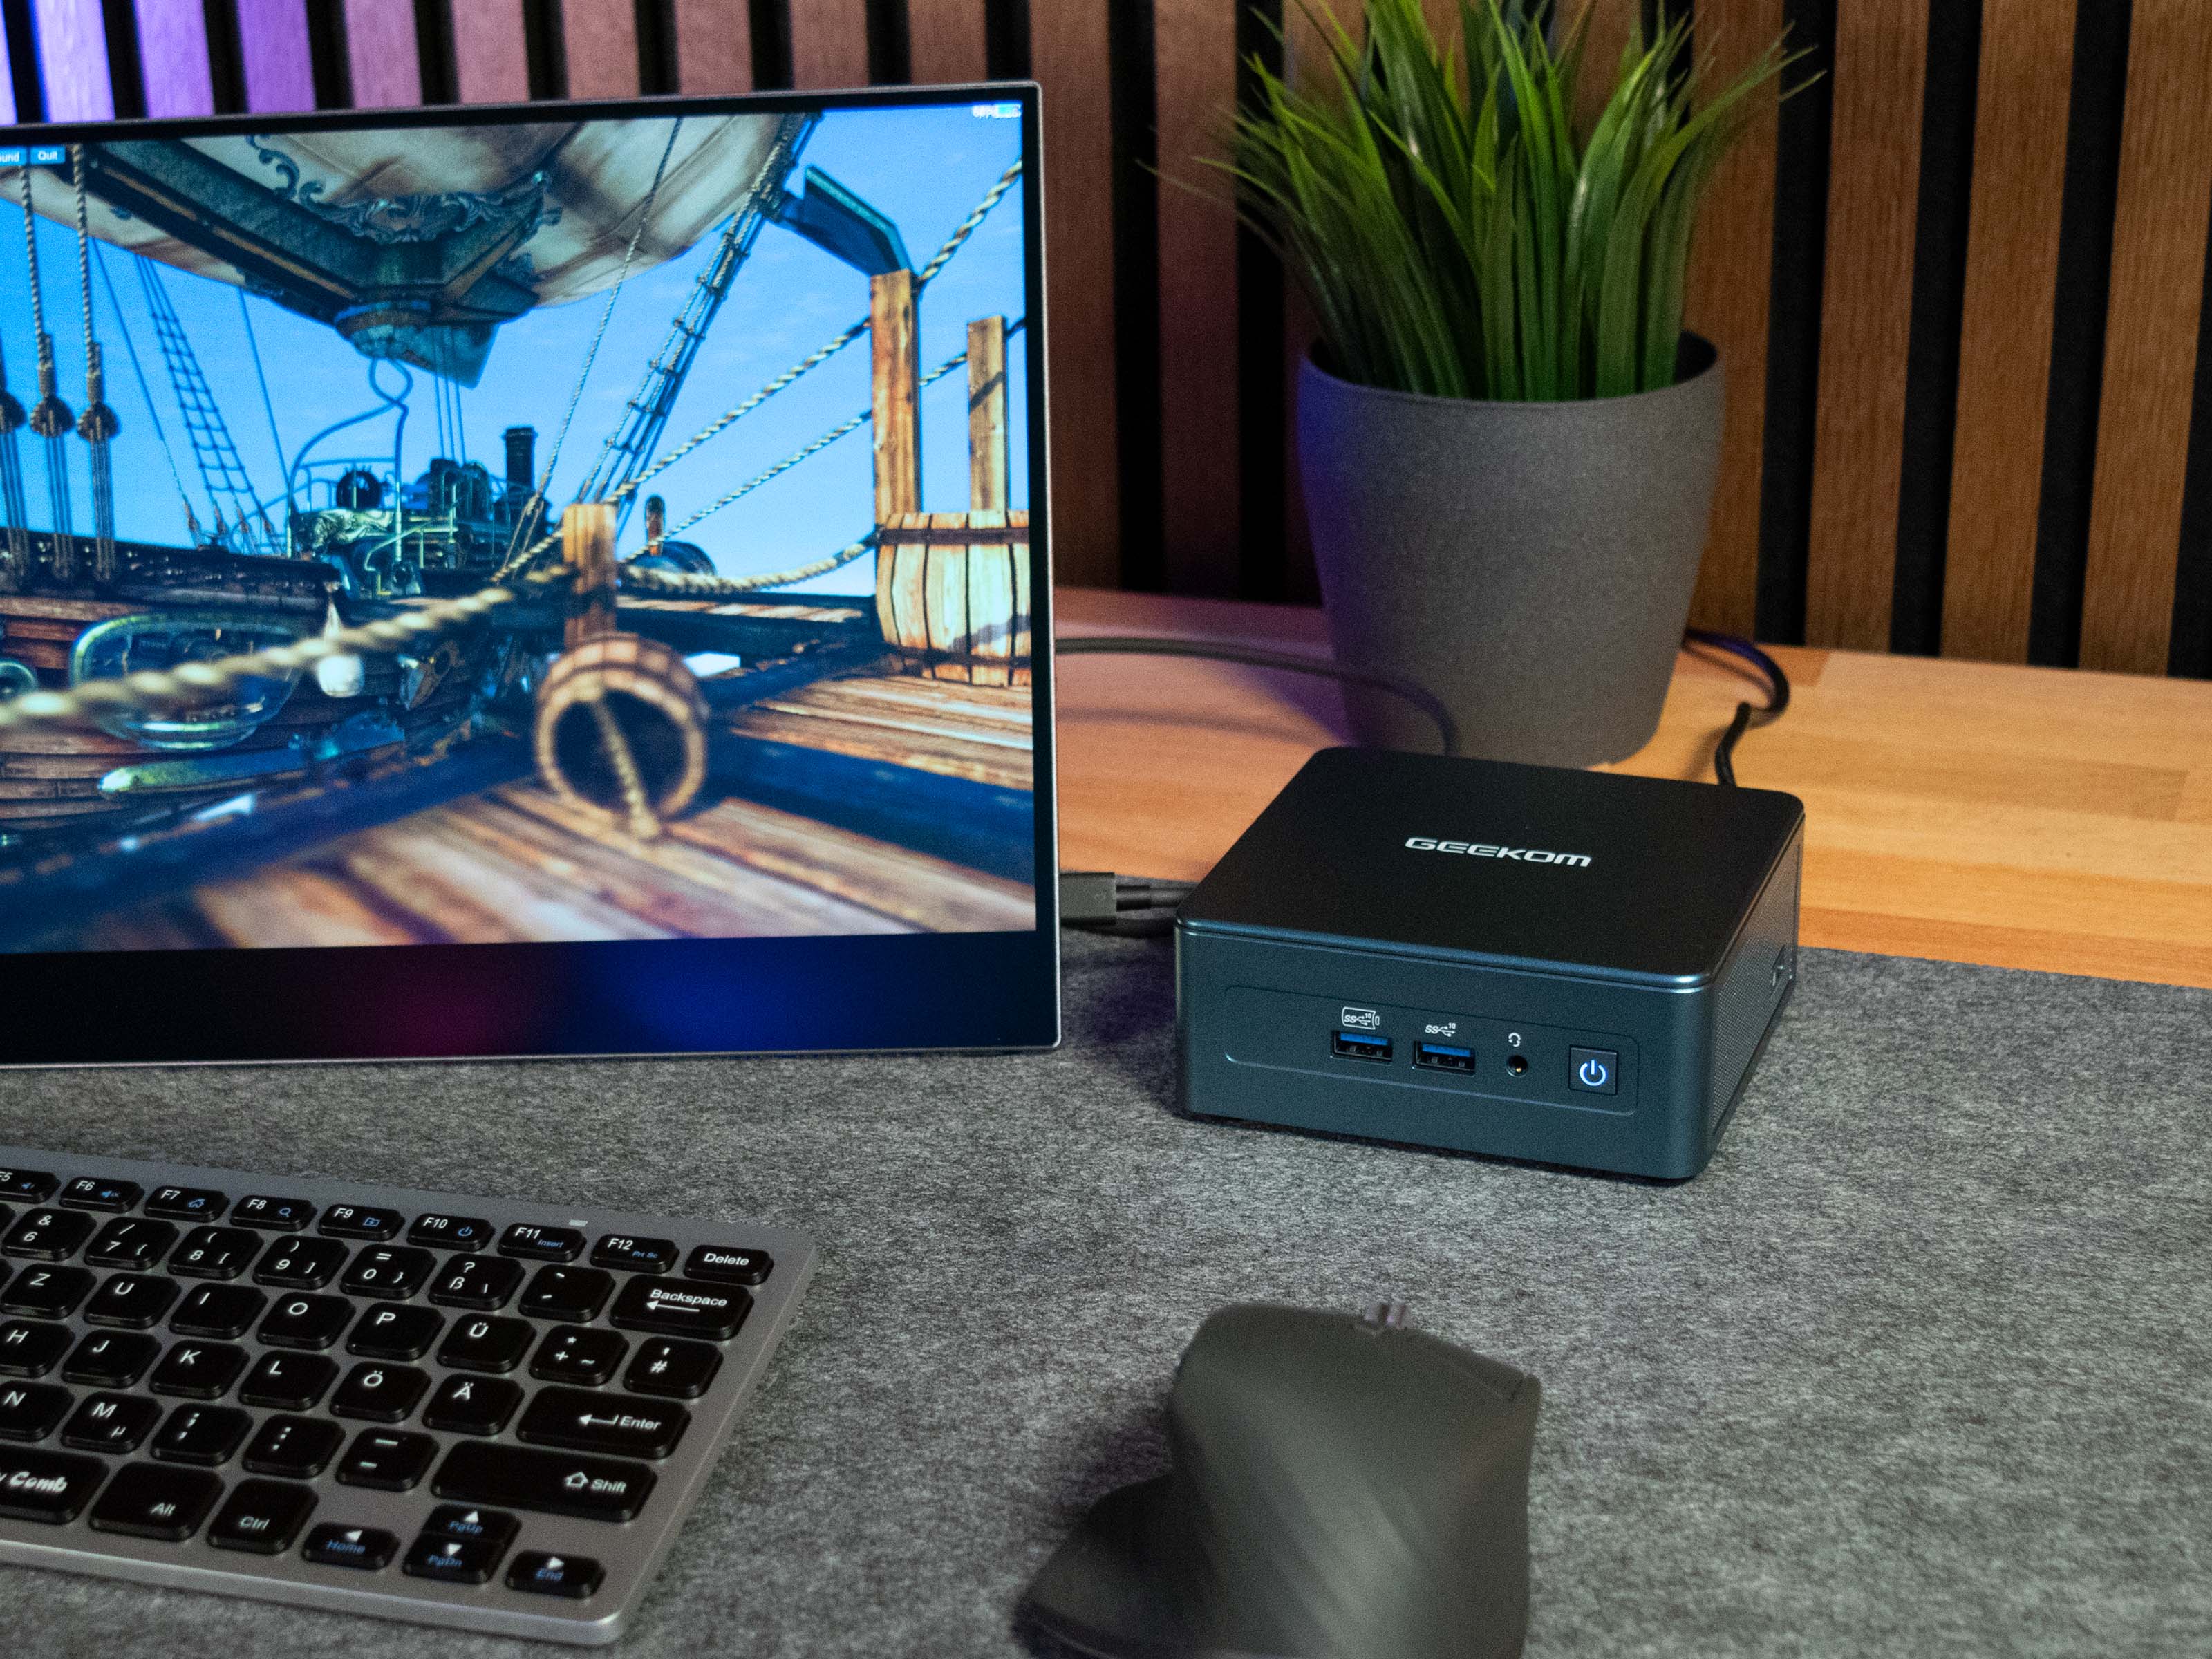 Geekom Mini IT12 review: Intel NUC competitor with an Intel Core